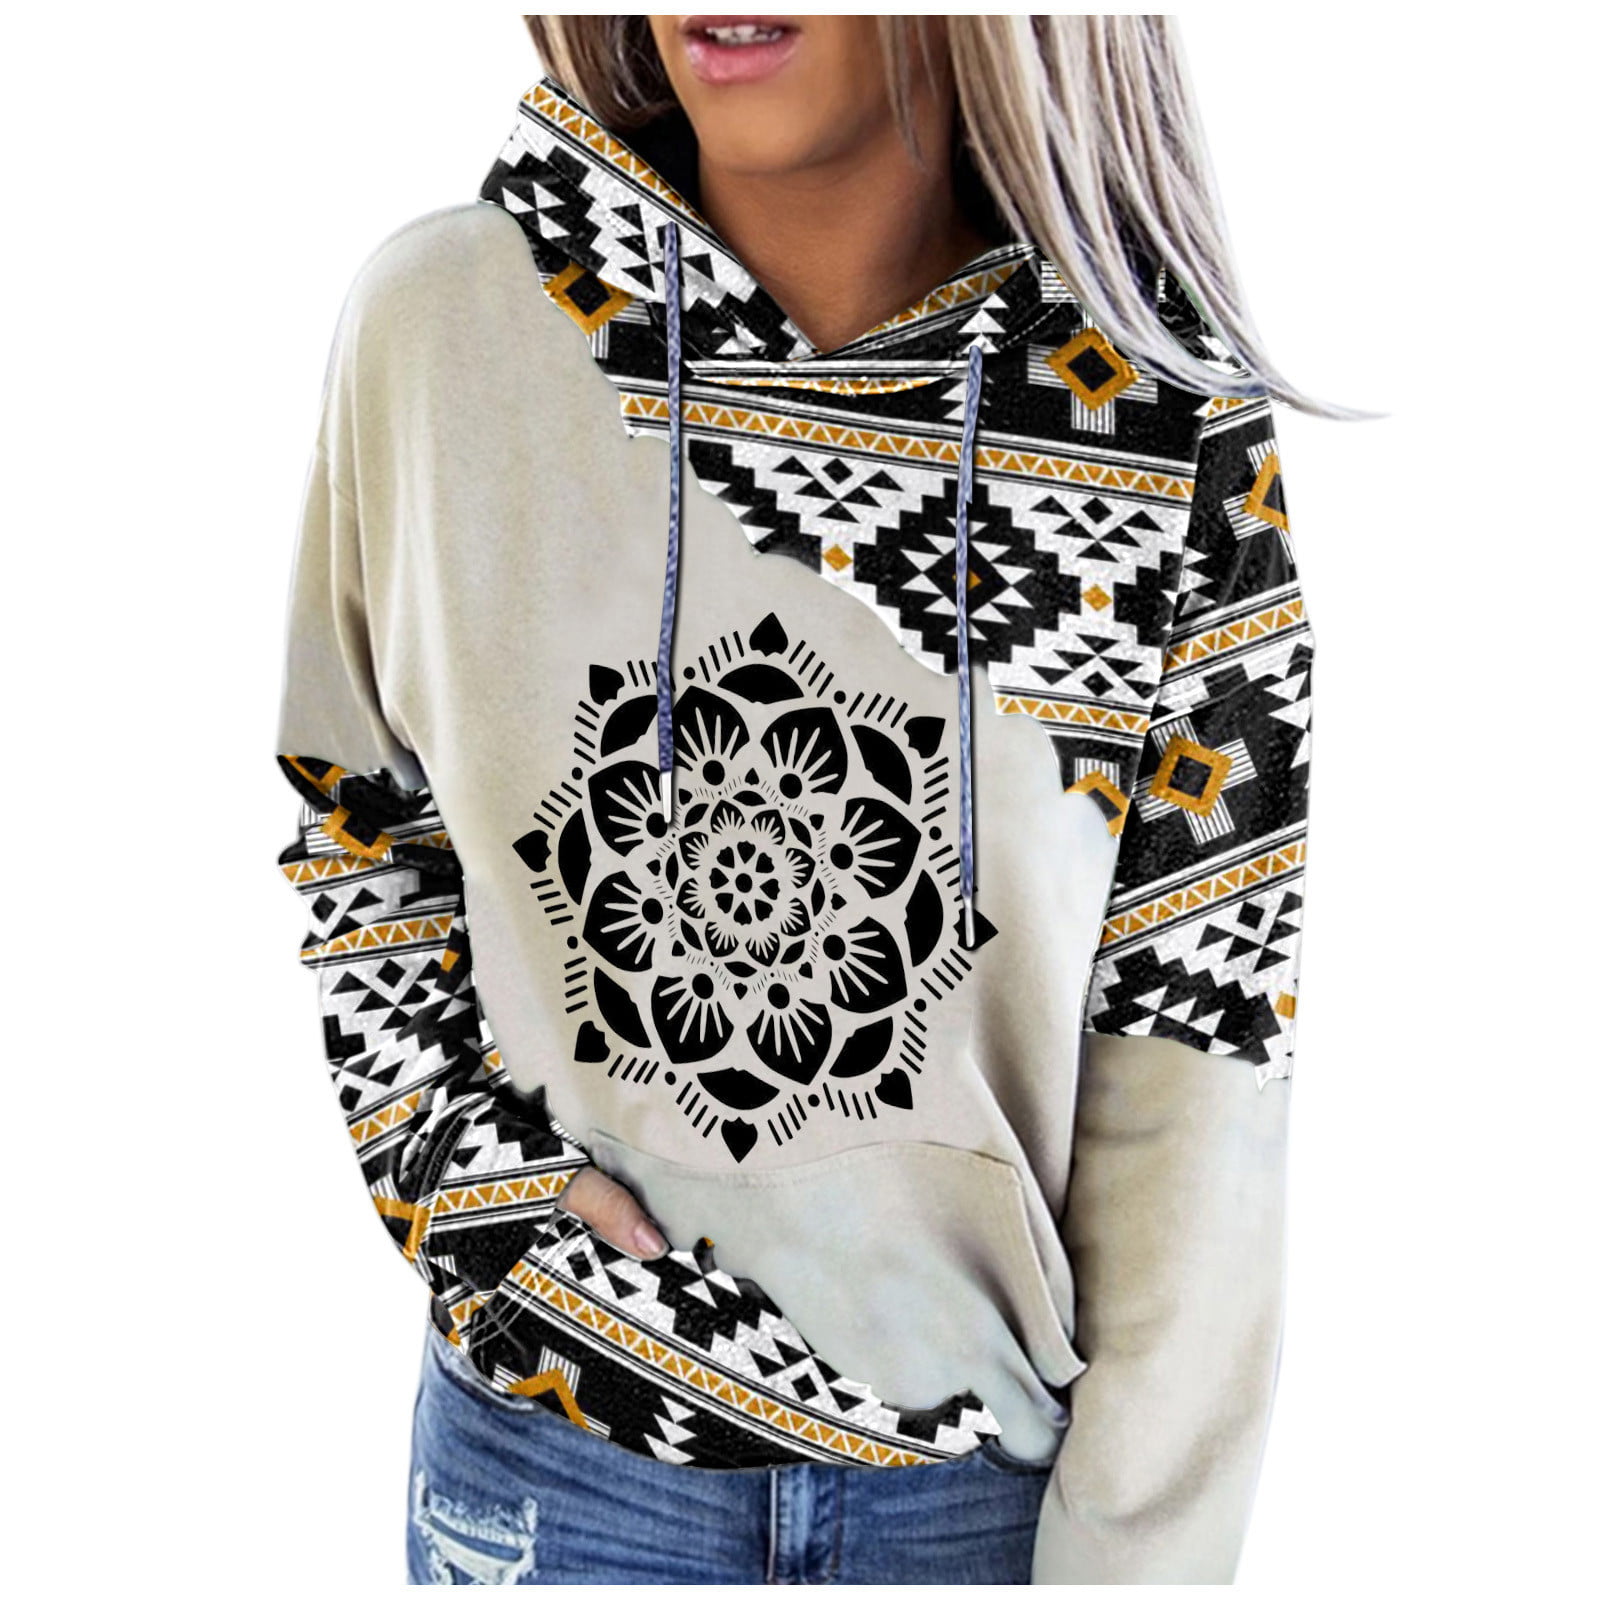 S-Fly Mens Long Sleeve Pullover Casual Loose Ethnic Print Hooded Sweatshirt